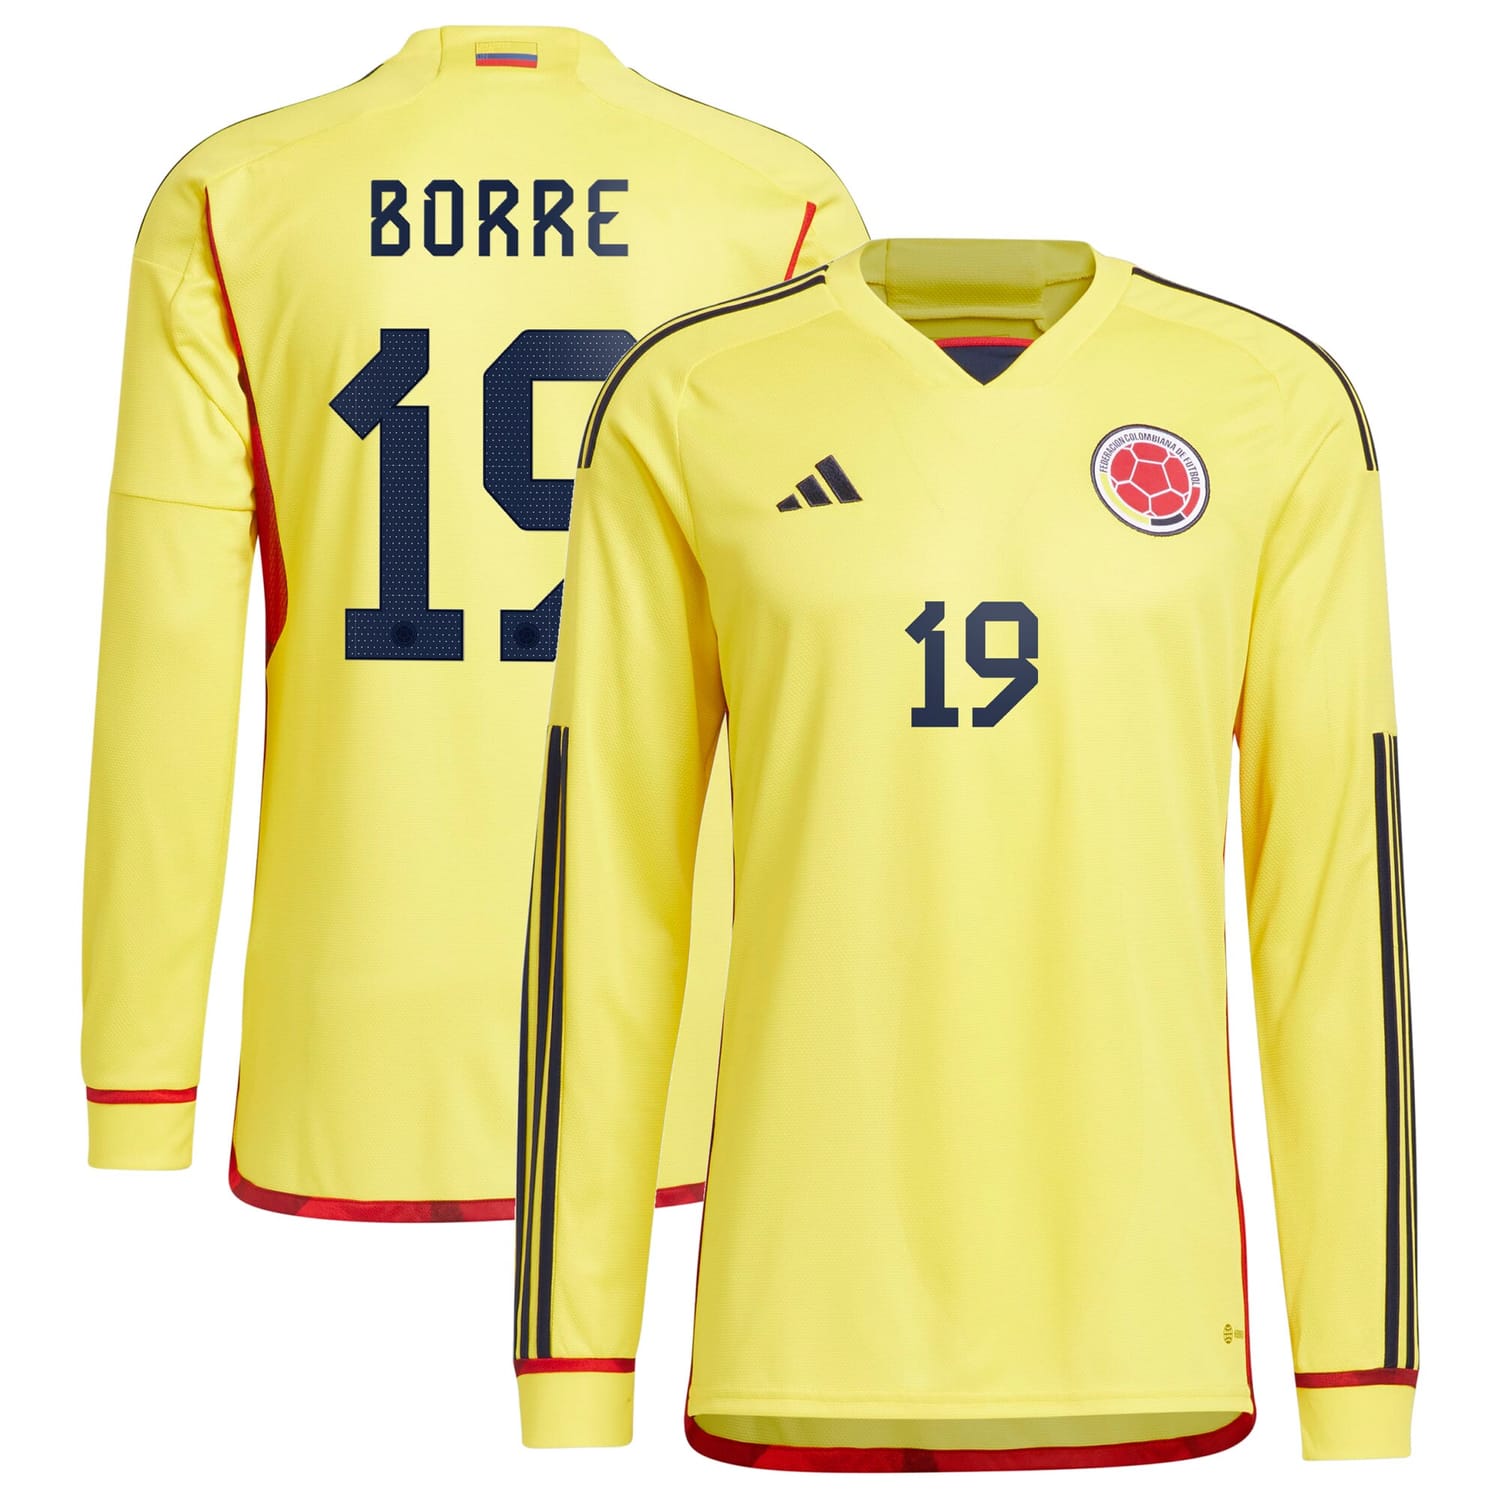 Colombia National Team Home Jersey Shirt Long Sleeve Yellow 2022-23 player Rafael Borré printing for Men